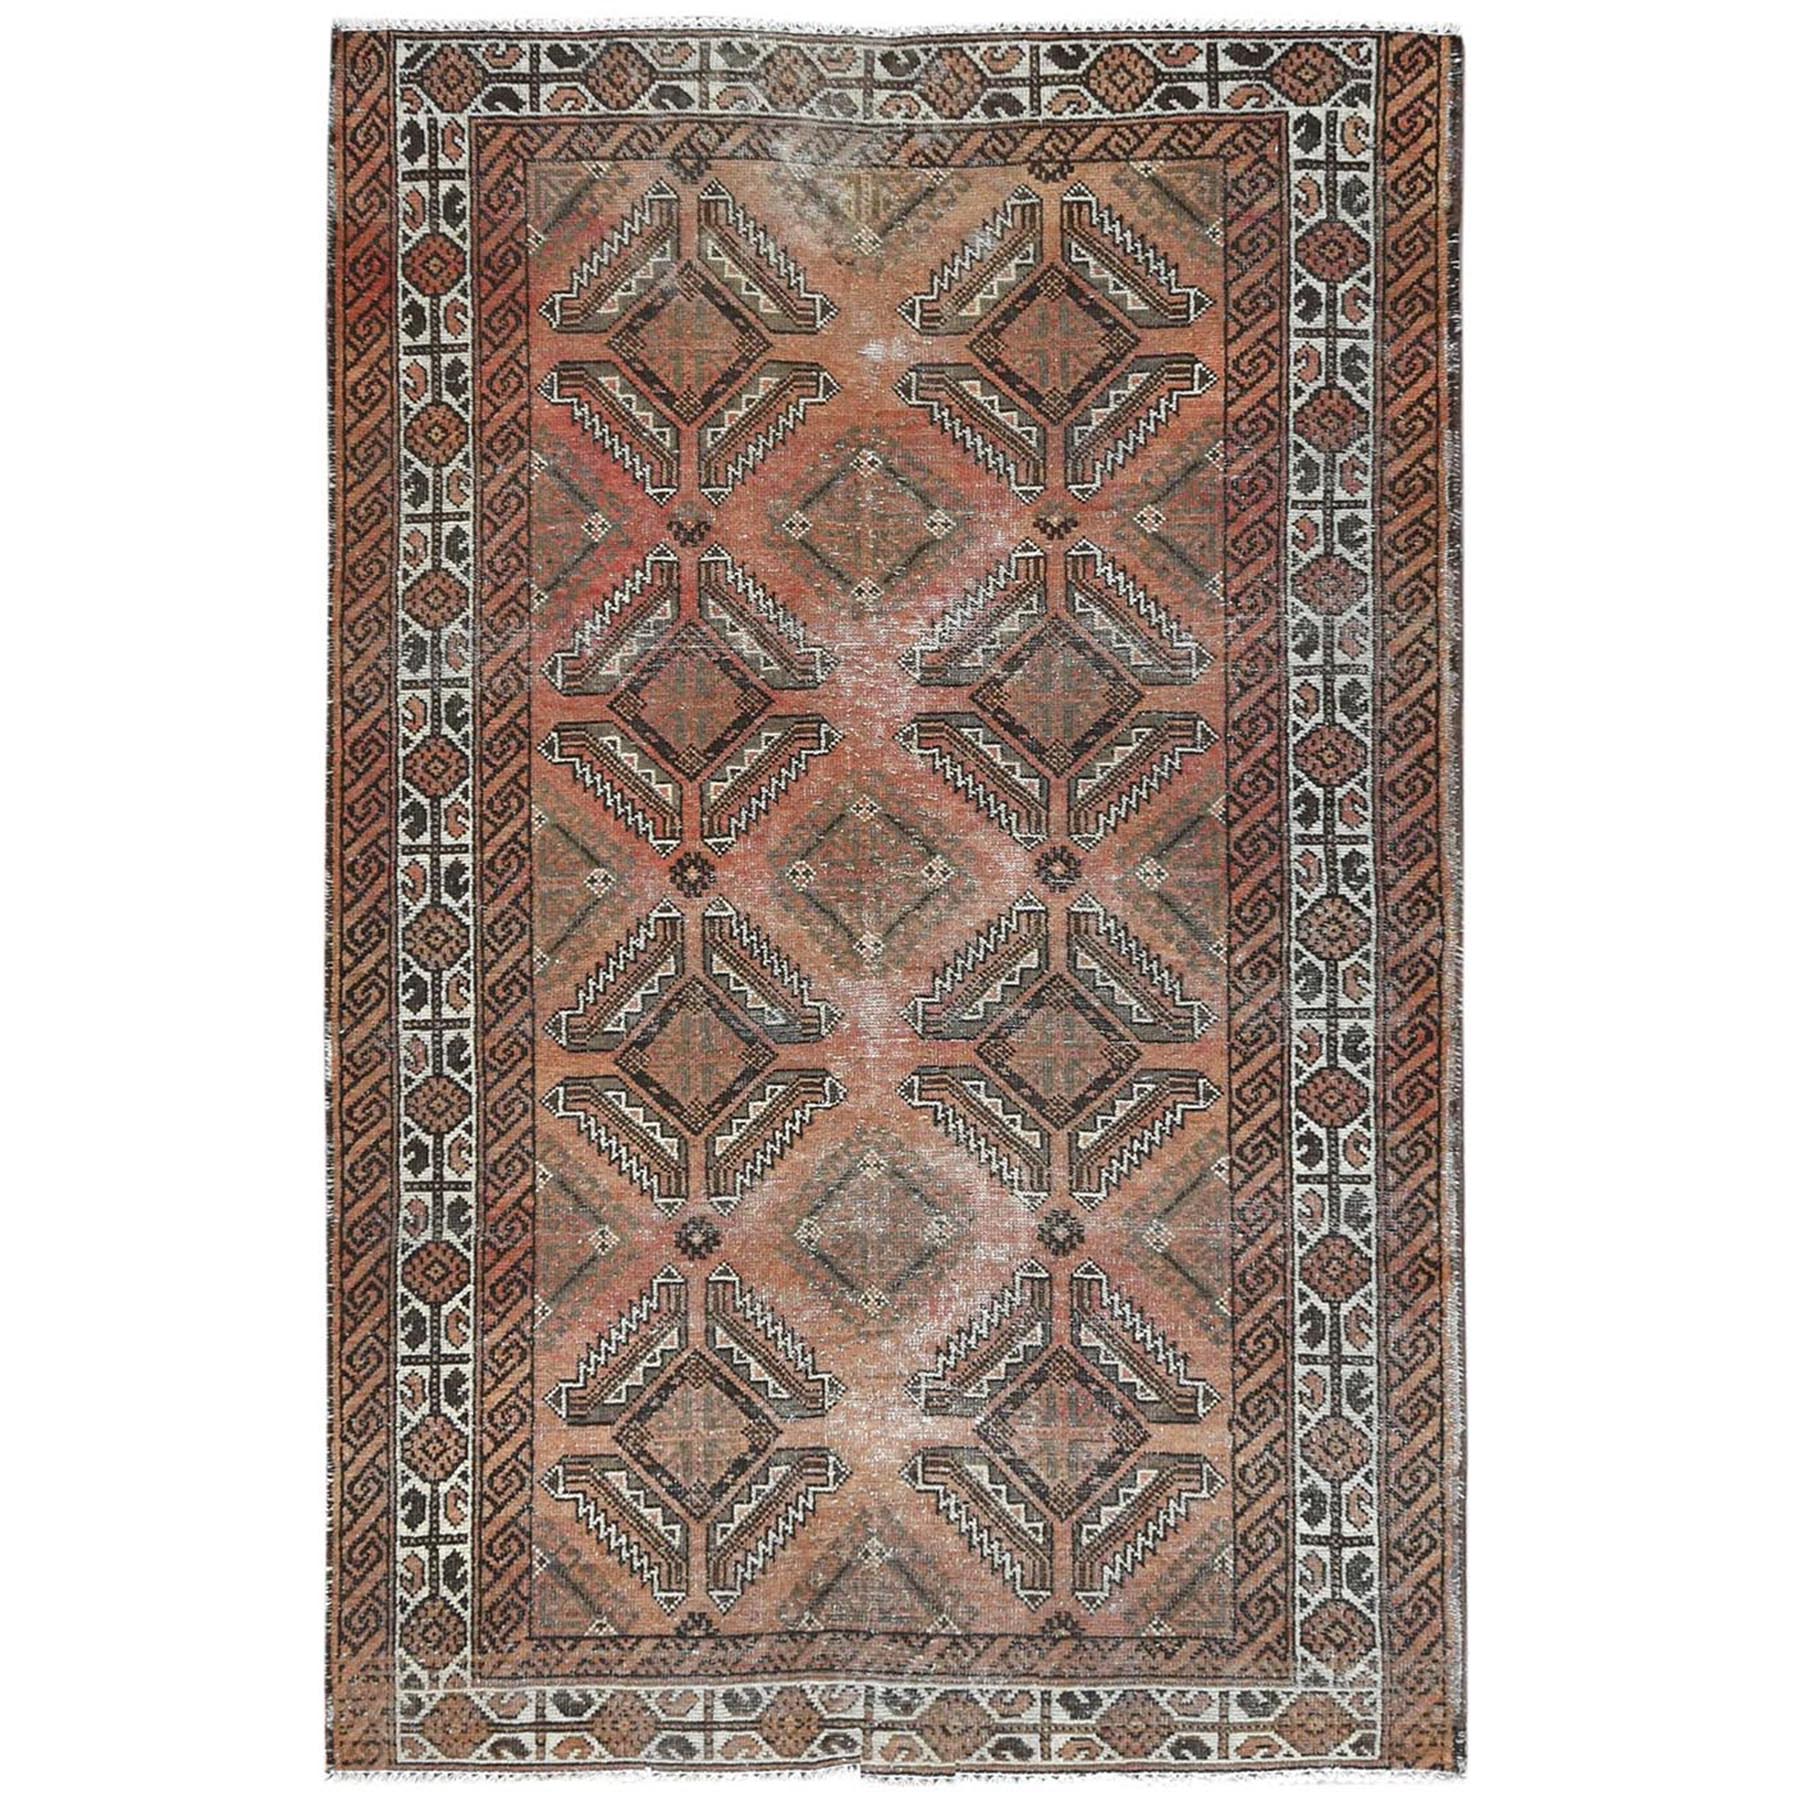  Wool Hand-Knotted Area Rug 4'0